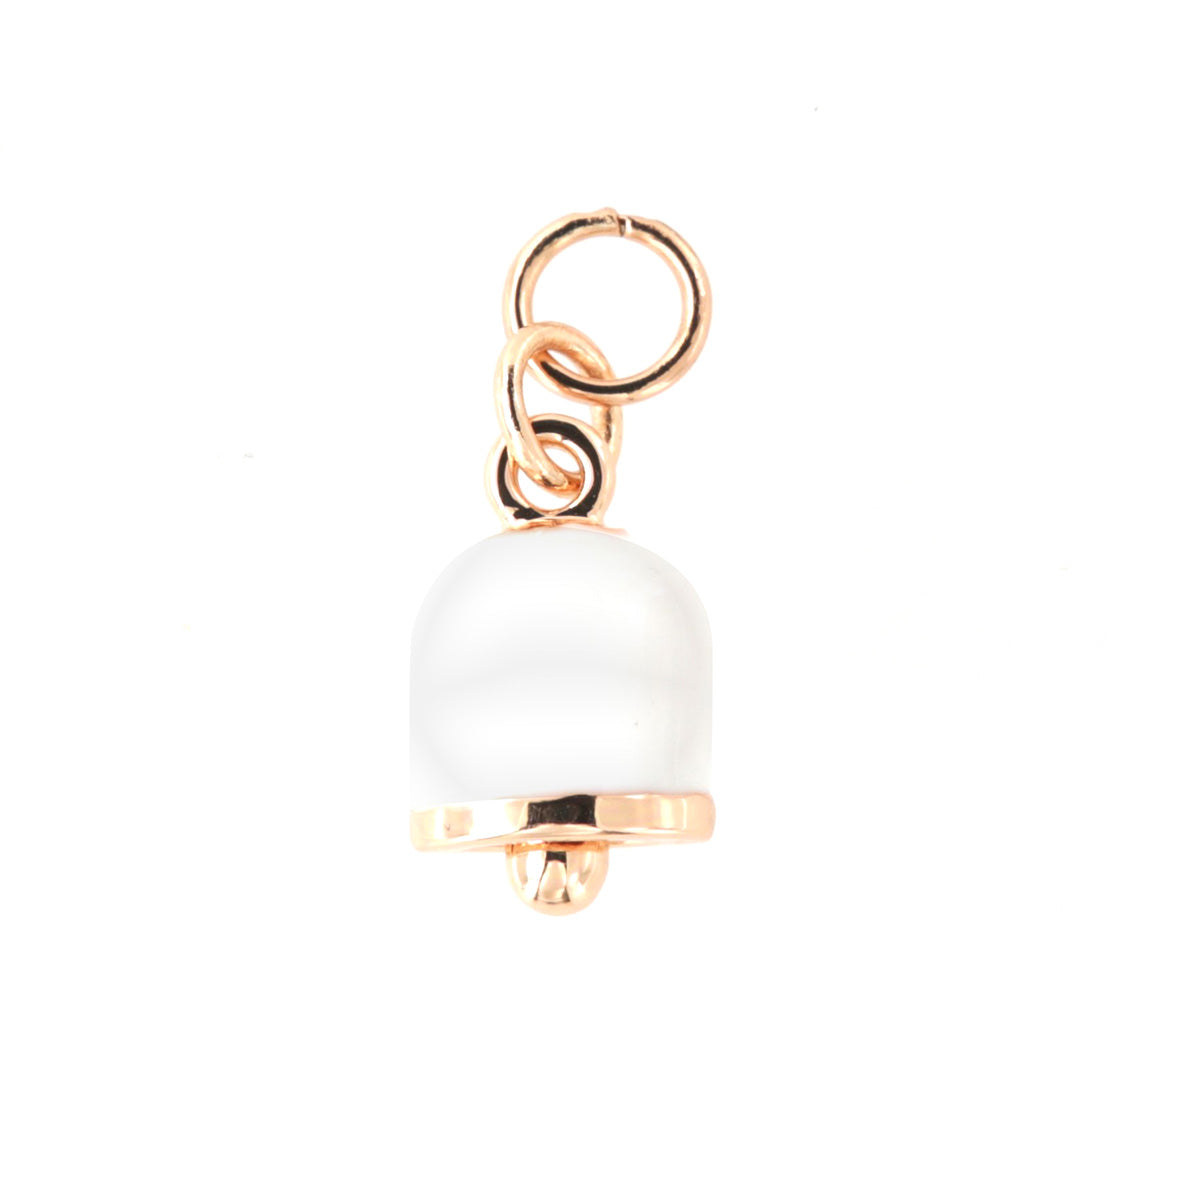 Metal pendant charming bell embellished with white enamel